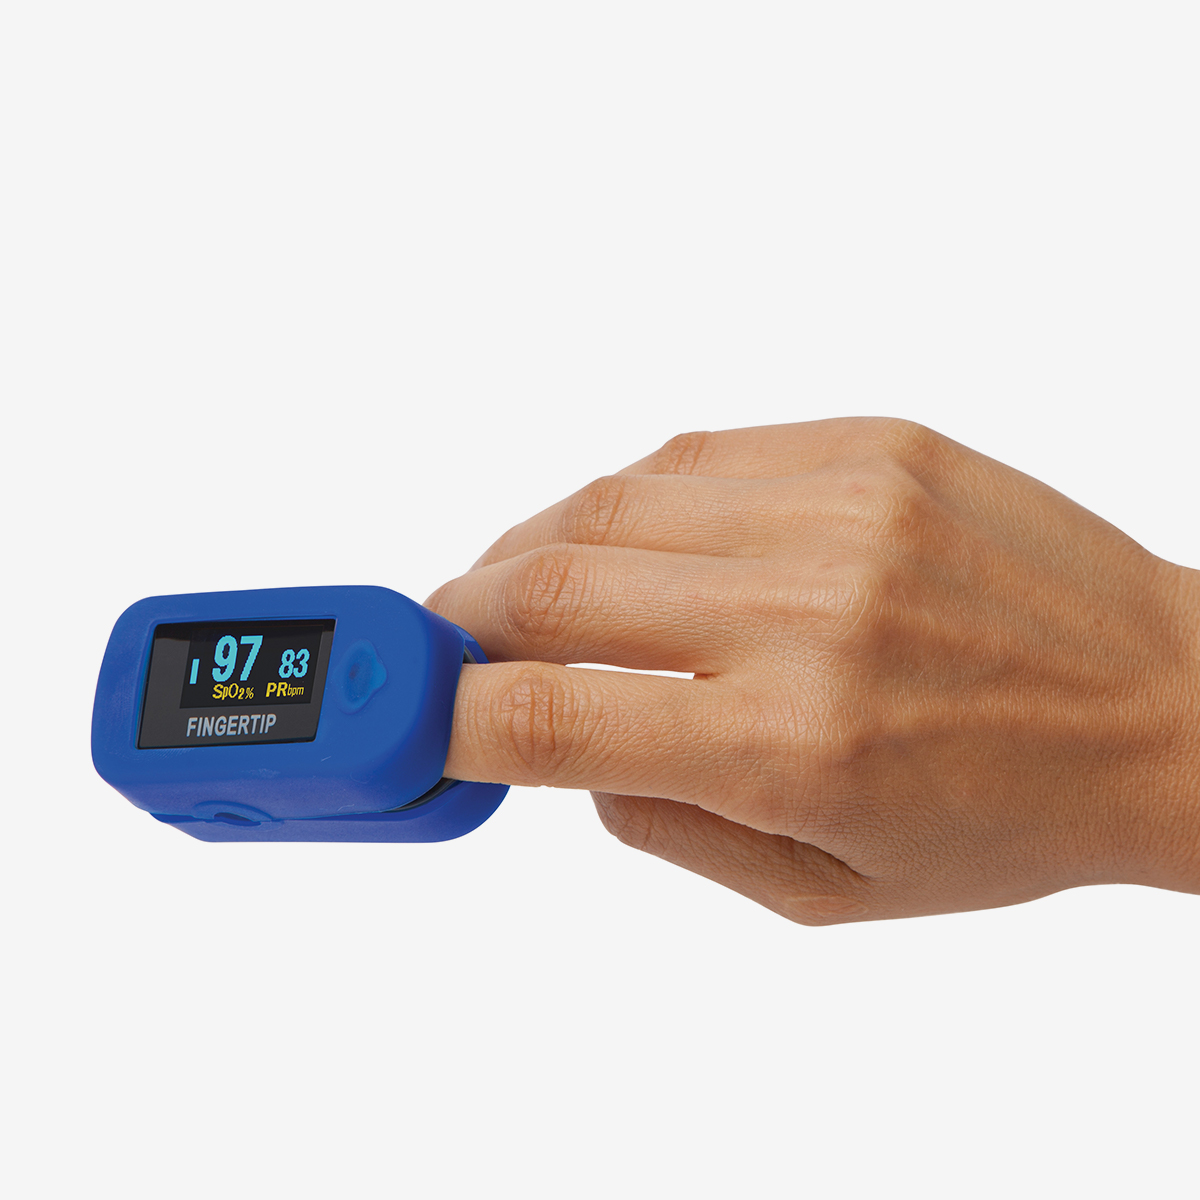 Hand using a blue MD300 C2 Pulse oximeter on white background